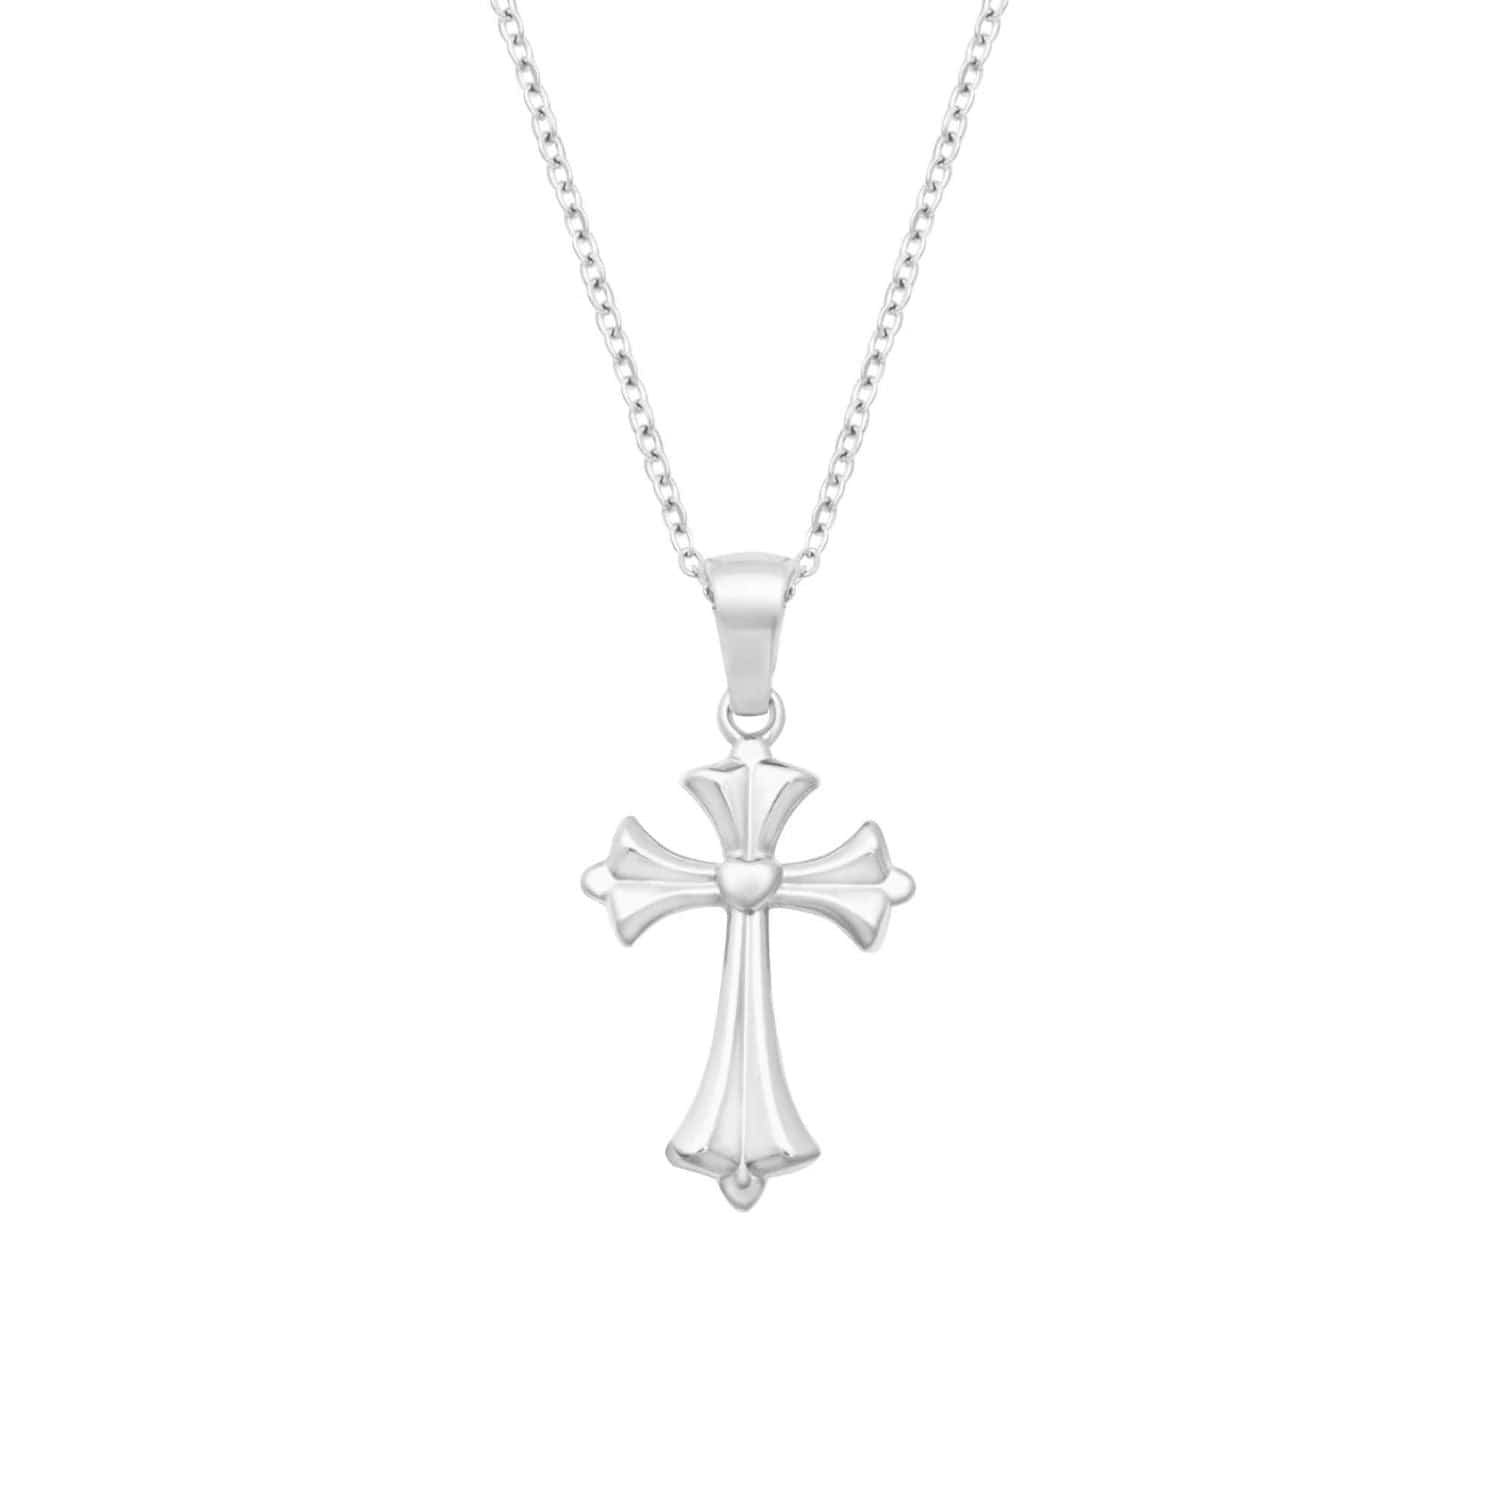 BohoMoon Stainless Steel Heavenly Cross Necklace Silver